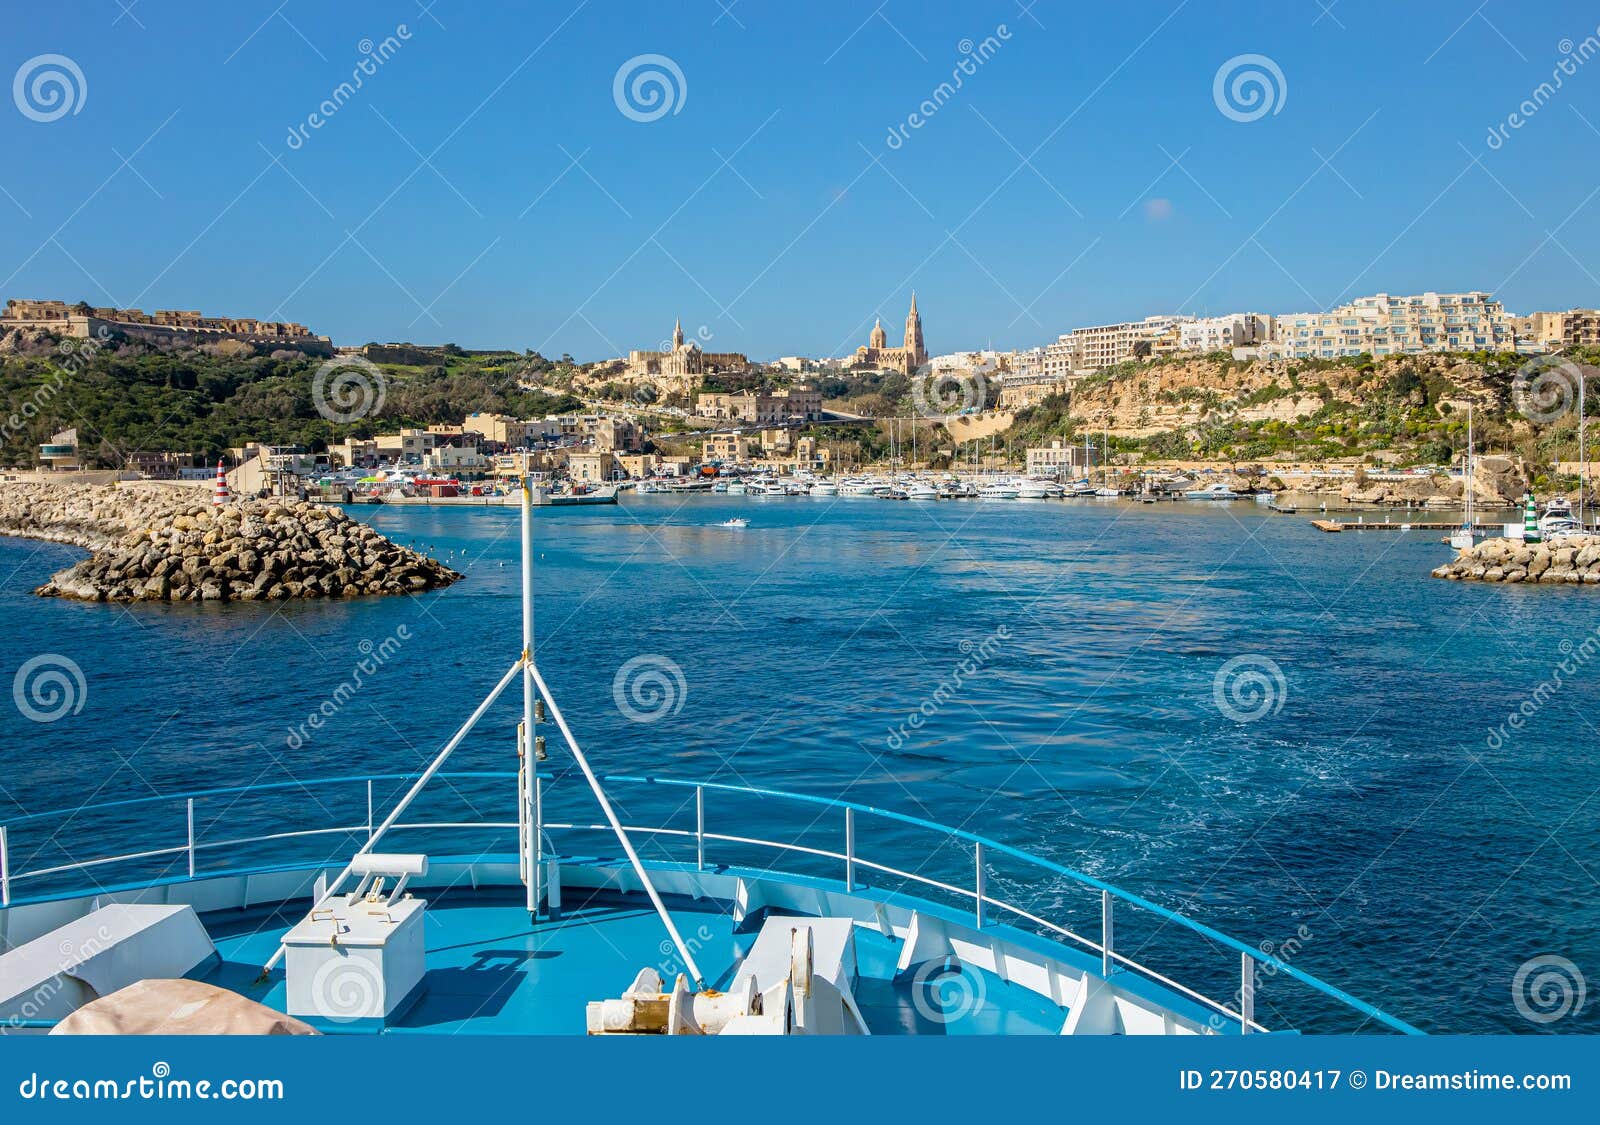 the ship arrives at the port of m?arr on the island of gozo, malta.